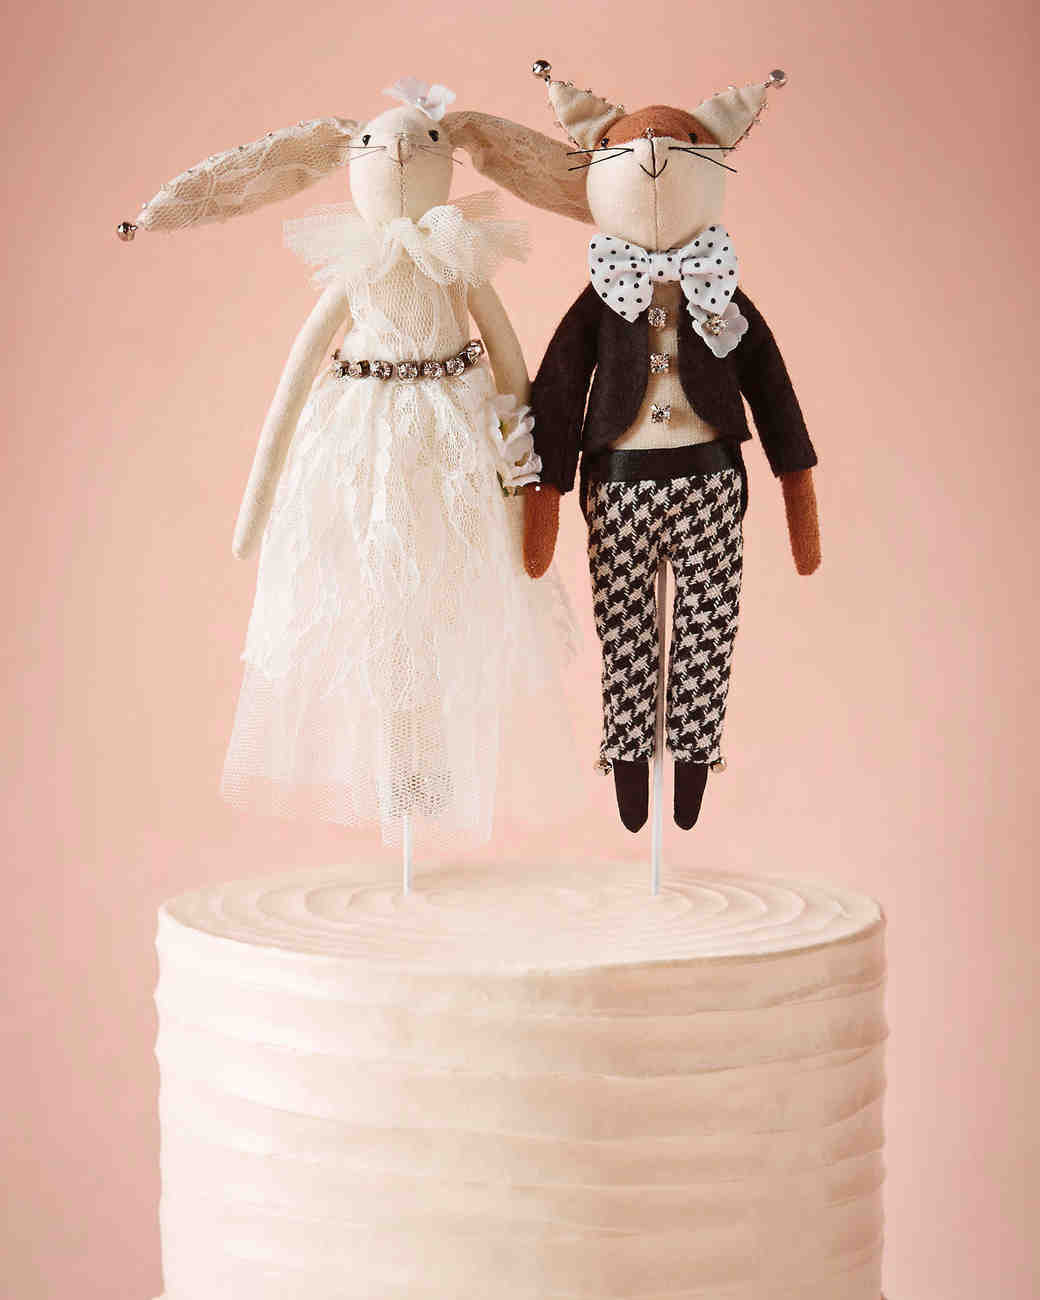 Cake Toppers For Weddings
 25 Unique Wedding Cake Toppers